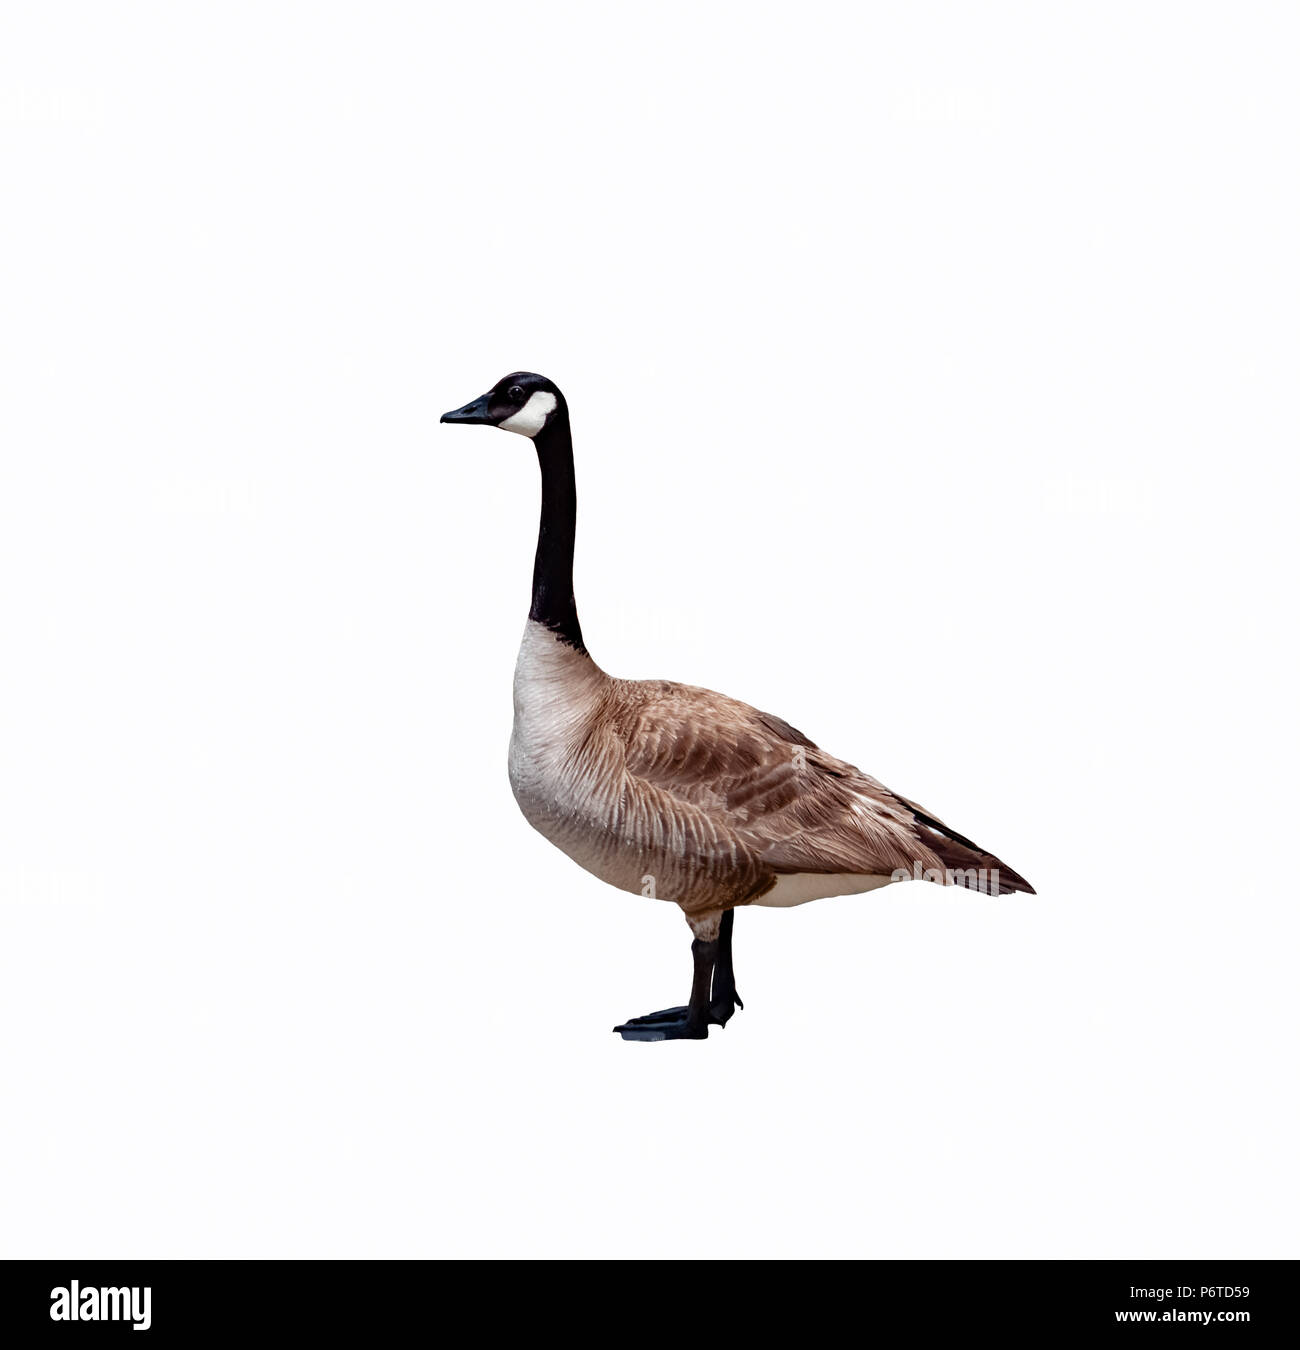 Canadian goose cut out close up against a white background Stock Photo -  Alamy